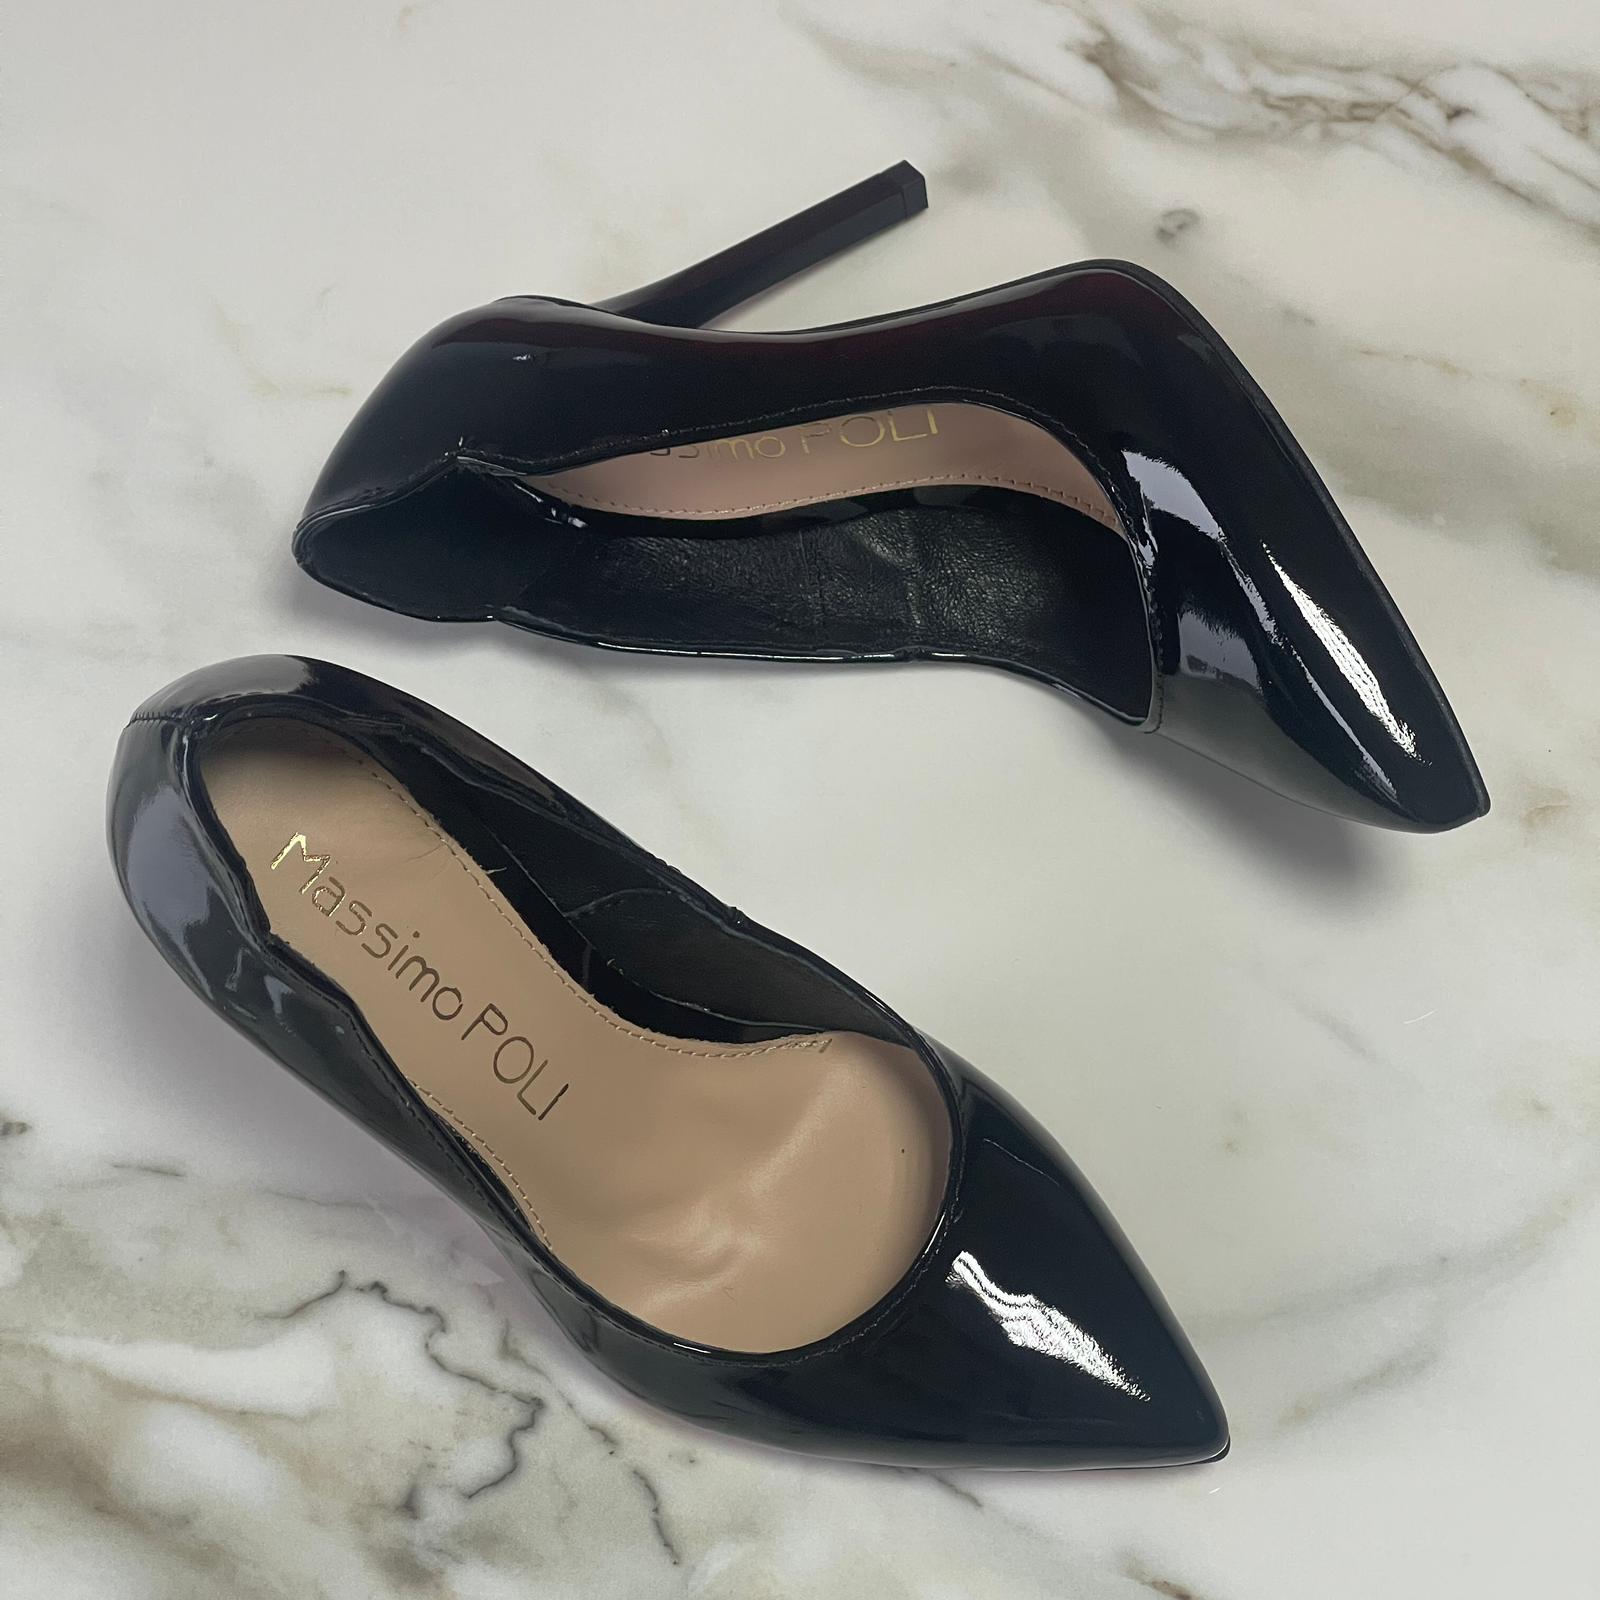 Black sole patent leather high heels